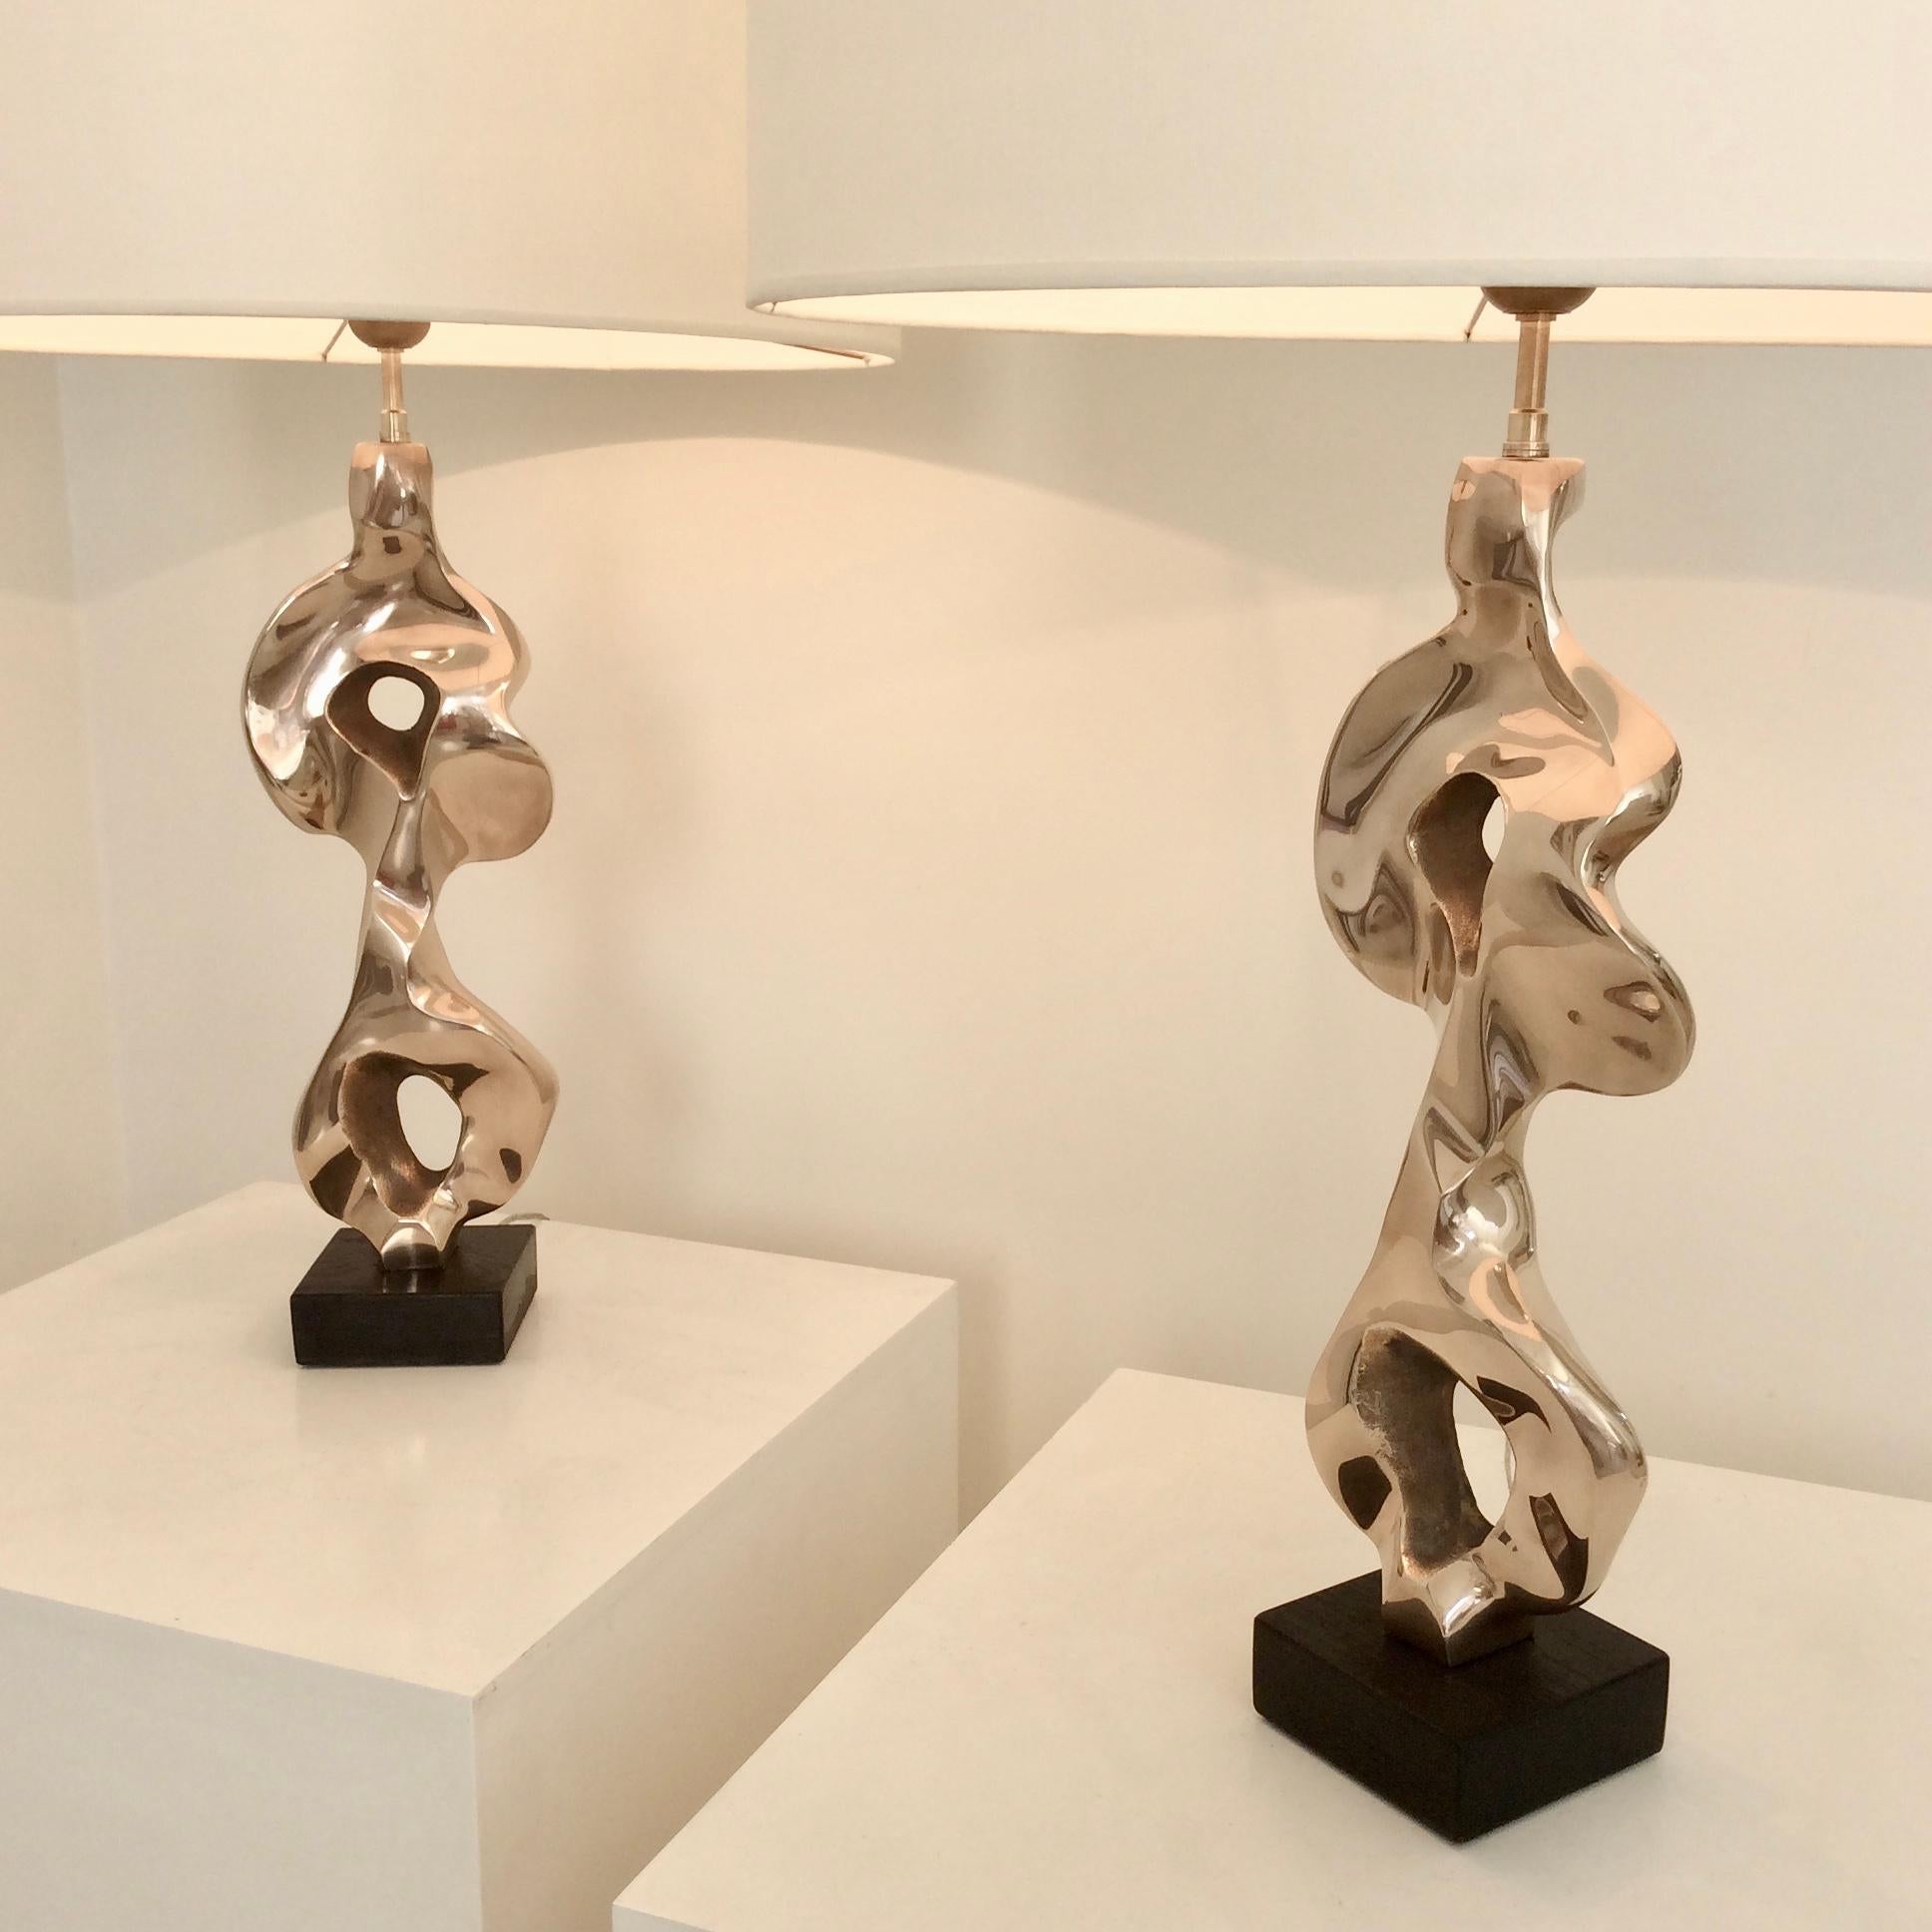 Nice Michel Jaubert organic form bronze table lamps, circa 1975, France.
Polished bronze, new ivory fabric shade, blackered wood base.
One of the lamps is signed by the artist on the base of the bronze.
One E27 bulb of 60 W.
Dimensions: 77 cm H,